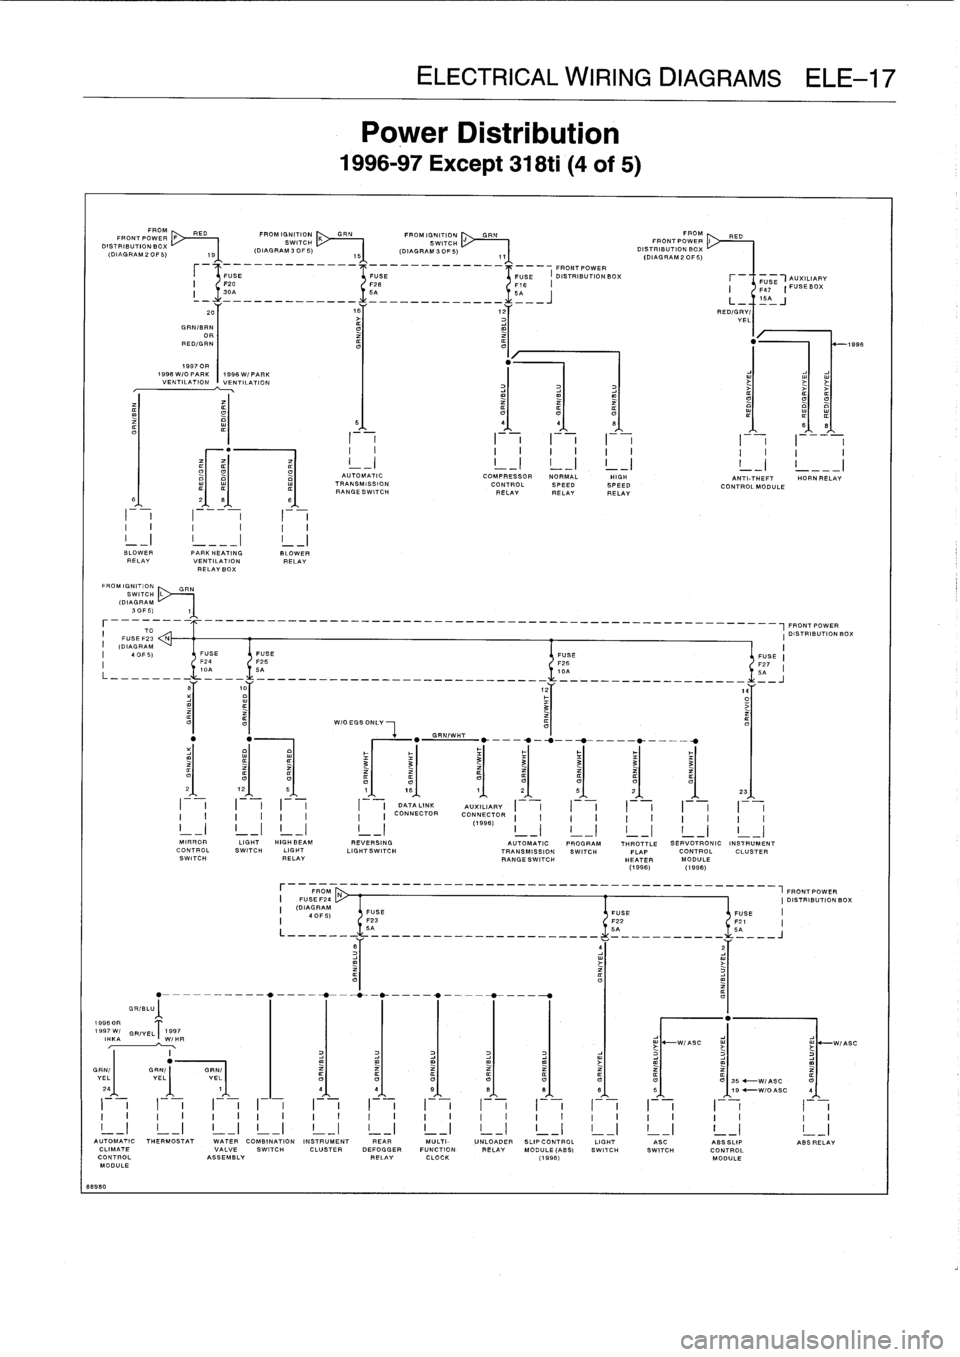 BMW 325i 1994 E36 Service Manual 
88989

FROM1~
RED
FRONT
P
.
DISTRIBUTIONBO
I/
X
(DIAGRAM
2
OF
5)
B

I

	

I

	

I

	

I
I

	

I

	

I

	

I

	

I

	

I
L
-1
BLOWER

	

PARK
HEATING

	

BLOWER
RELAY
VENTILATION
RELAYRELAY
BOX
FROM
I